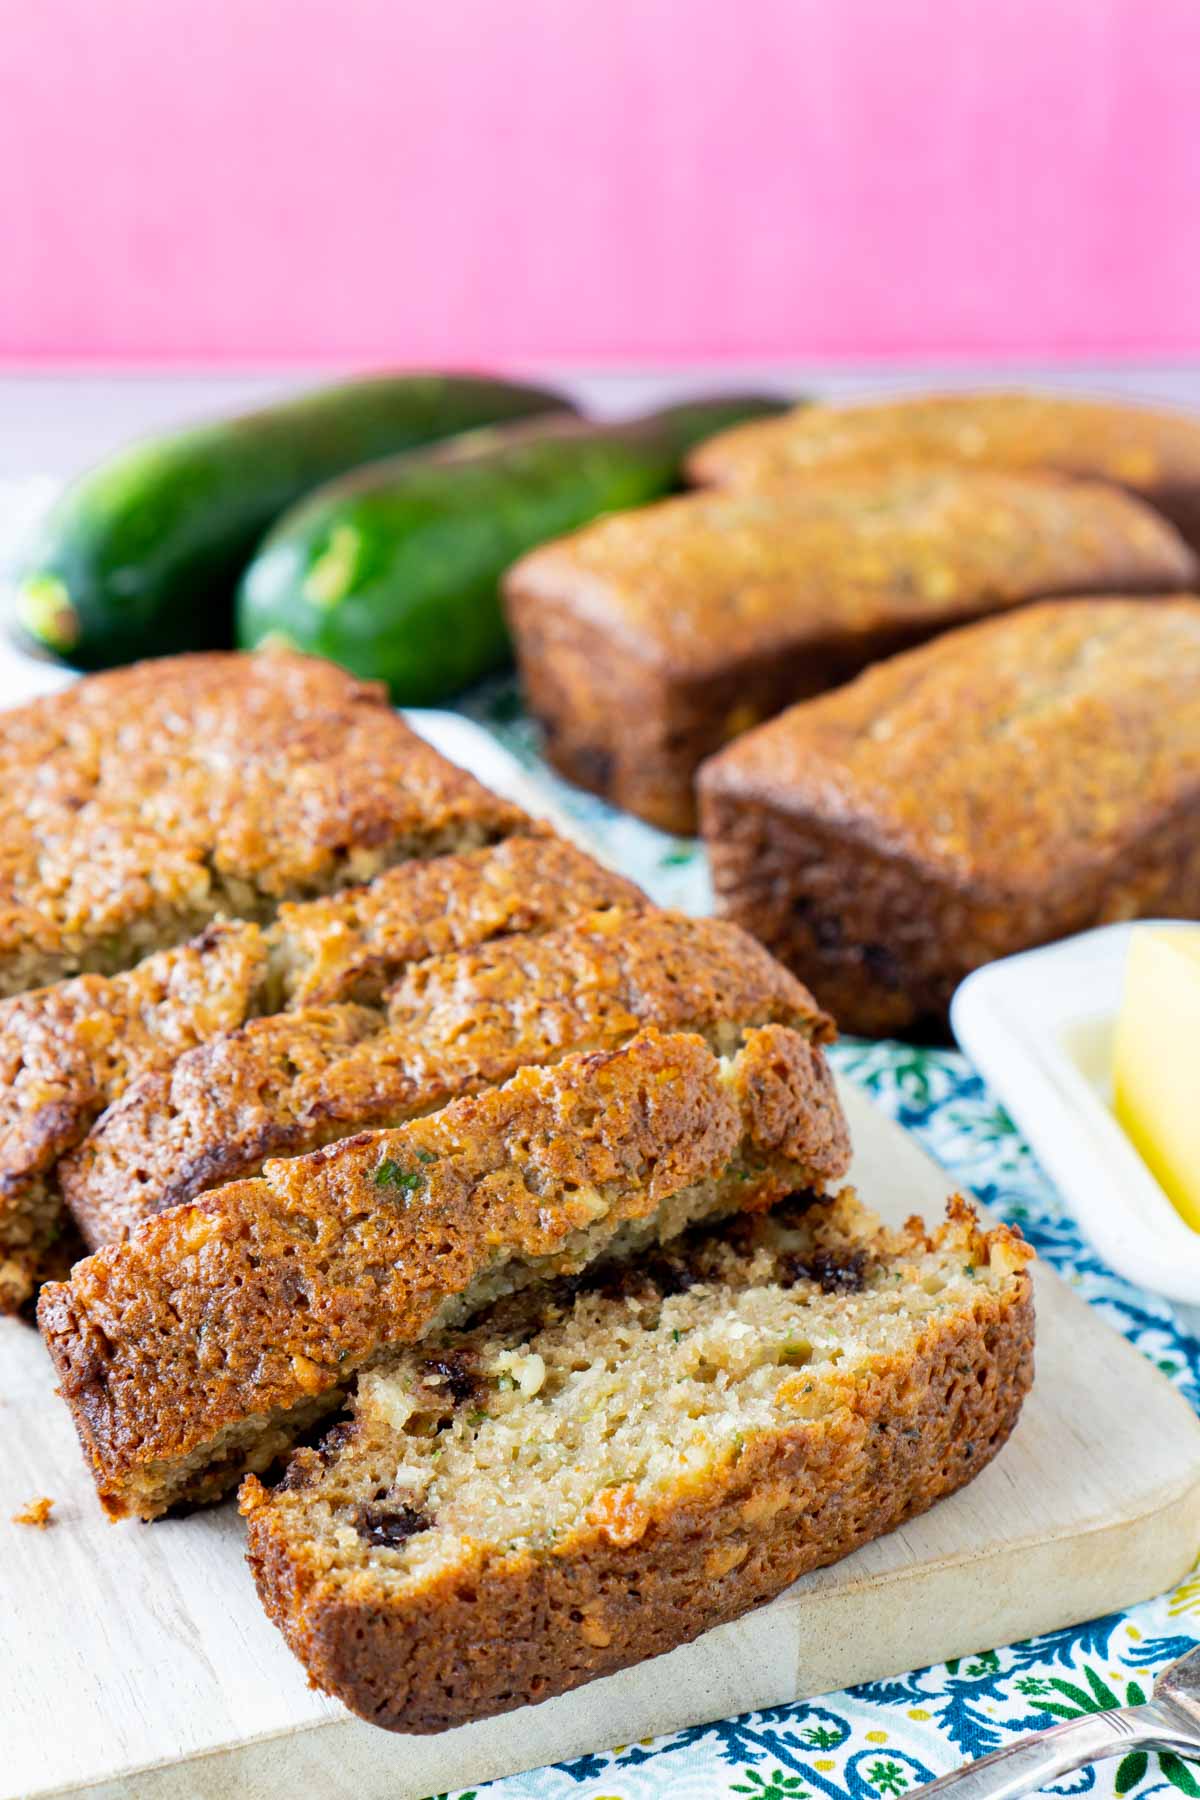 Sliced loaf of chocolate chip zucchini bread with mini loaves and zucchini in the background